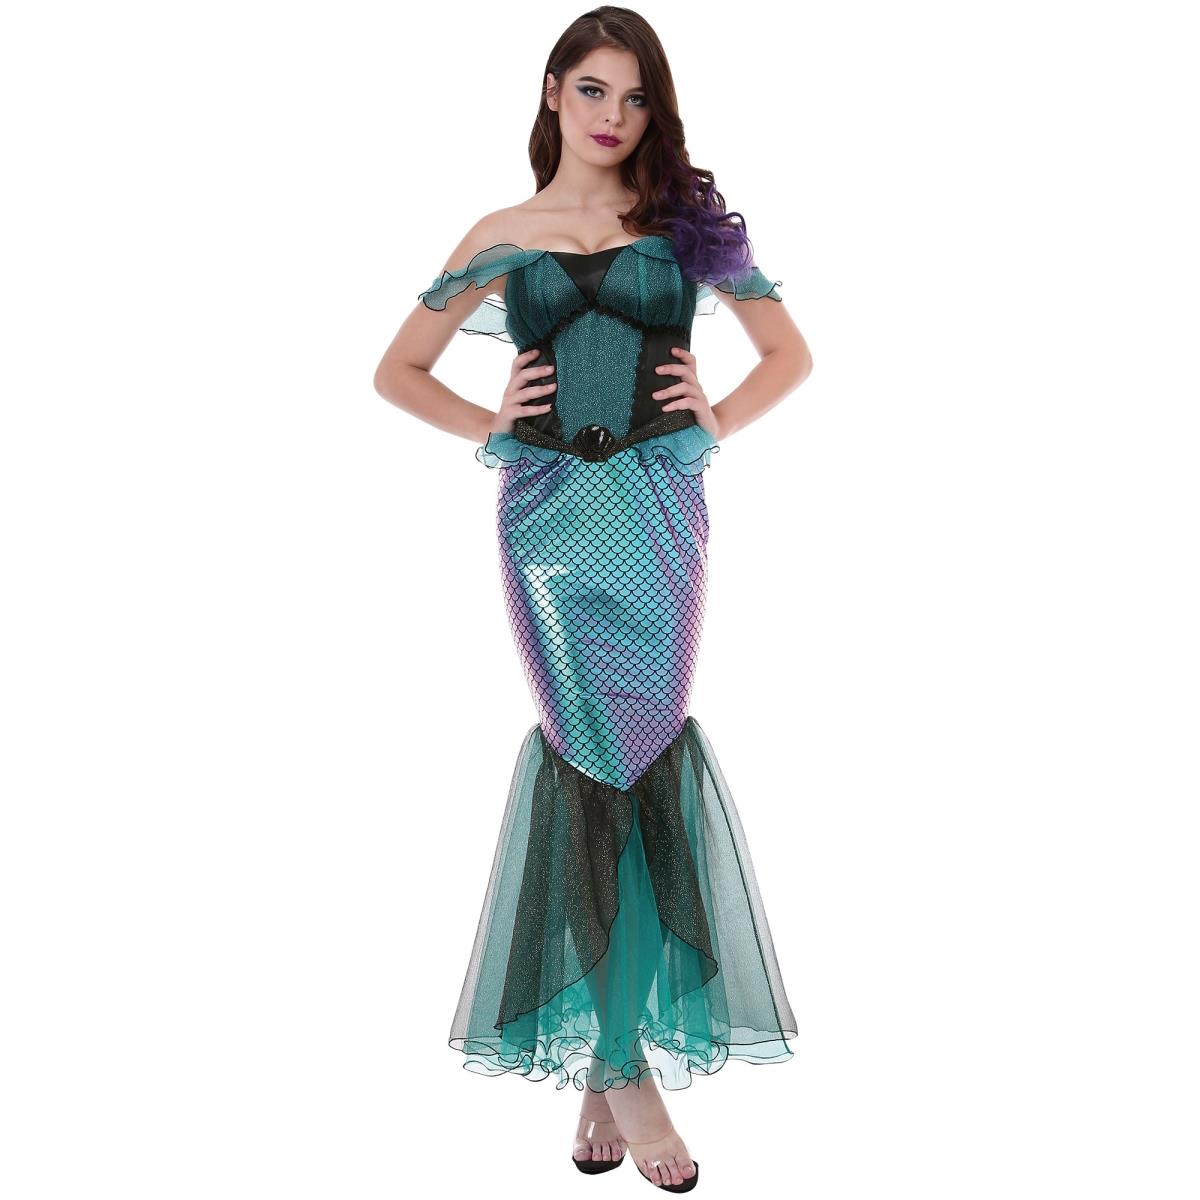 Picture of Brybelly MCOS-038S Mystical Mermaid Costume, Small